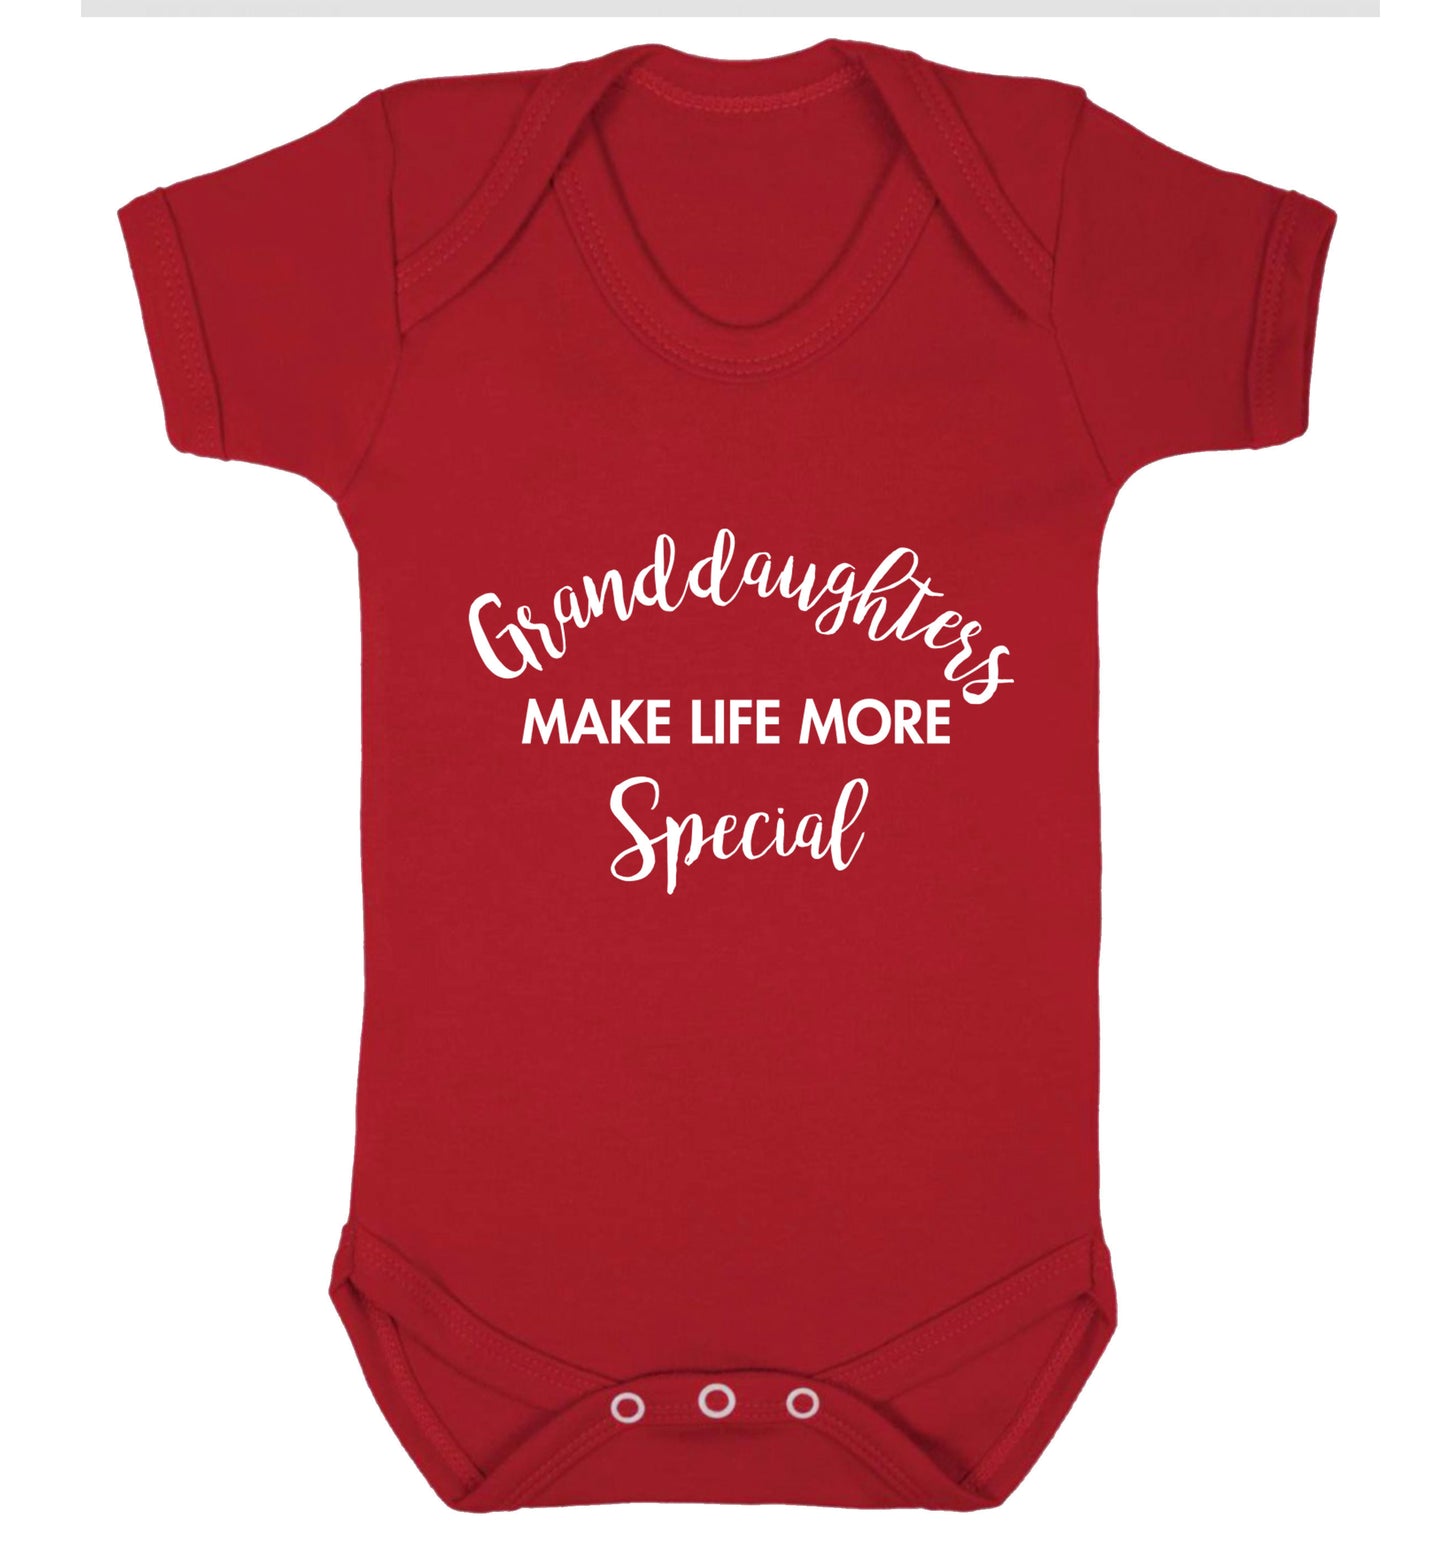 Granddaughters make life more special Baby Vest red 18-24 months